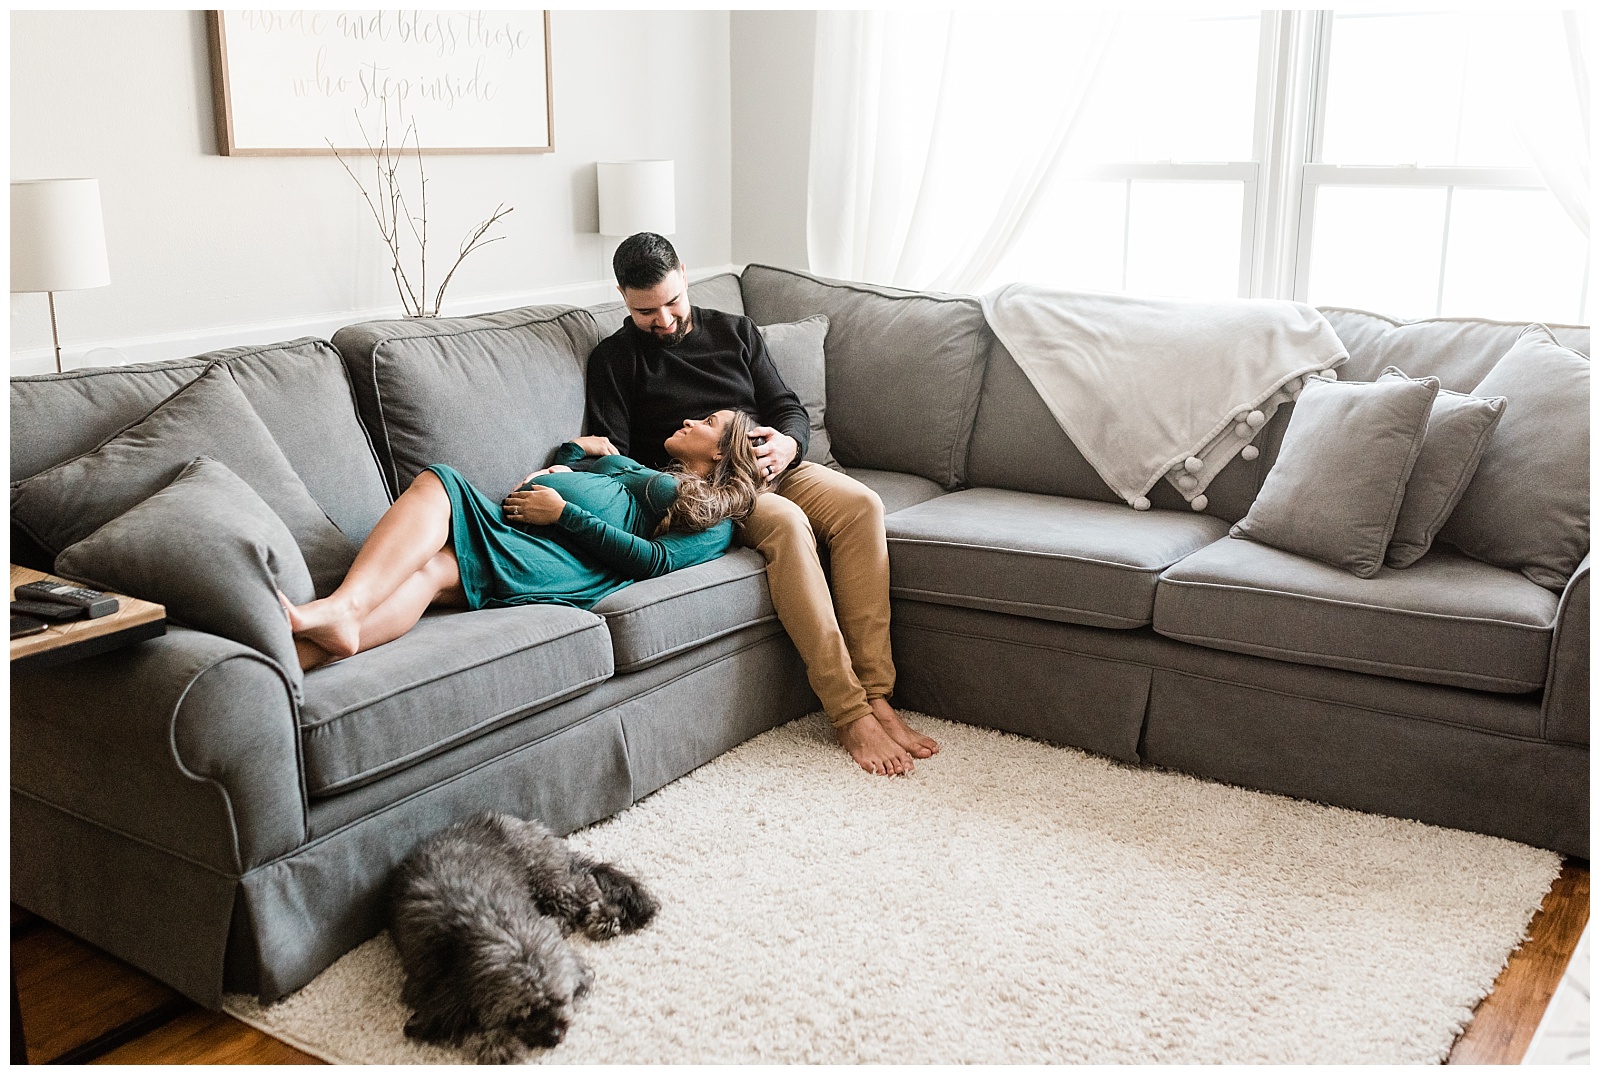 In Home Maternity Session, Family, Nursery, Baby, New Parents, Maternity Shoot, Pregnant, Pregnancy Photos, New Jersey, Photographer, Baby Boy, Couch, Living Room, Home, Cozy, Snuggle, Photo